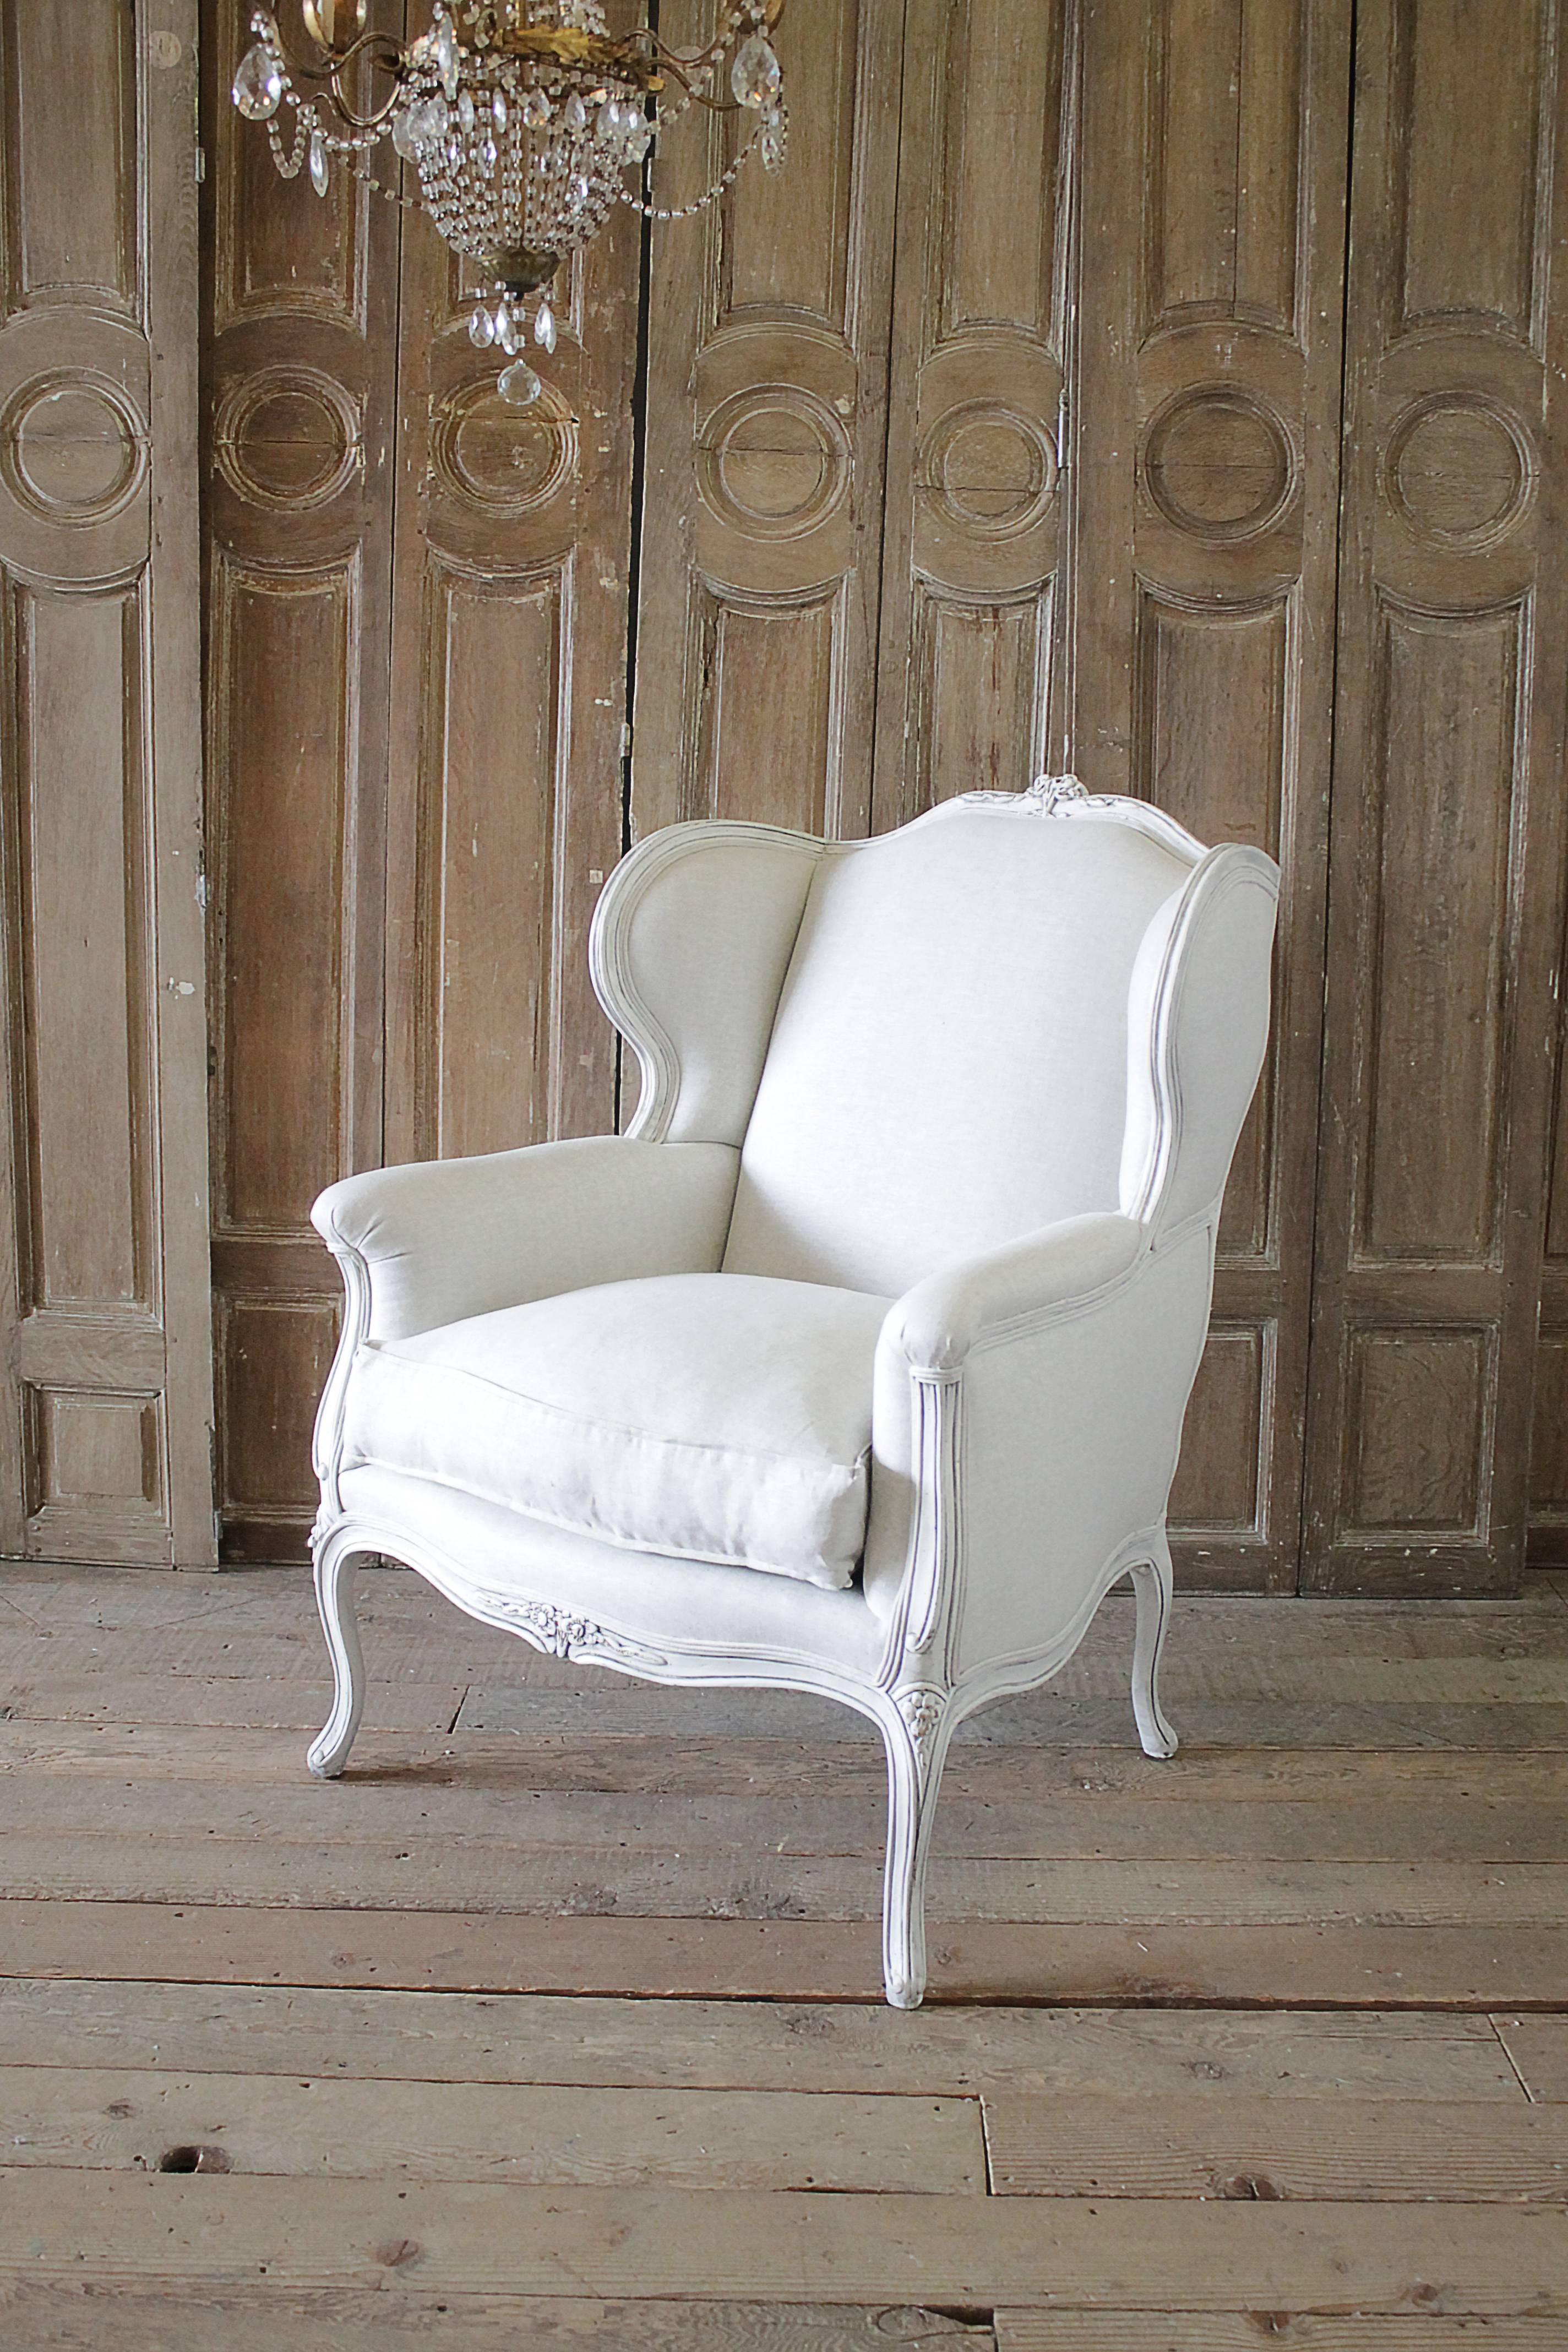 Early 20th century oversized Louis XV style wing chair, painted in our soft oyster white finish, with subtle distressed edges, and upholstered in a light natural linen, and double welt trim. The back of the chair has a slight pitch, so when you sit